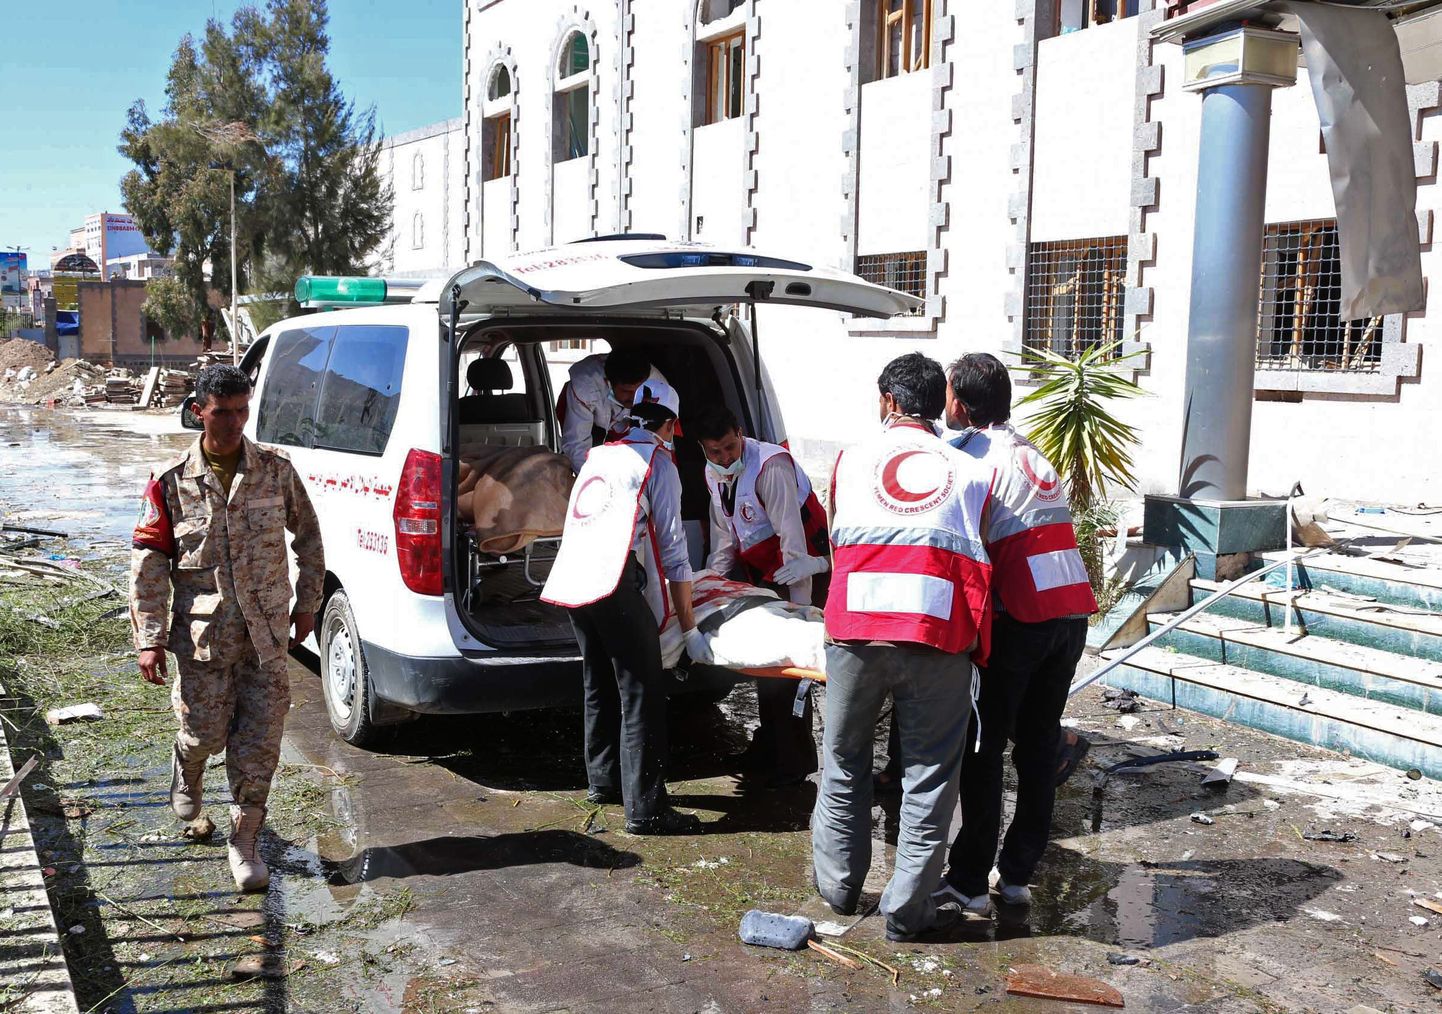 This photo provided by Yemen's Defense Ministry shows paramedics loading a victim into an ambulance after an explosion at the Defense Ministry complex in Sanaa, Yemen, Thursday, Dec. 5, 2013. A suicide car bomber struck Yemen's Defense Ministry Thursday, killing more than a dozen soldiers and paving the way for a carload of gunmen wearing army uniforms to storm the heavily guarded compound in the capital of Sanaa, military and hospital officials said. (AP Photo/Yemen Defense Ministry) / TT / kod 436